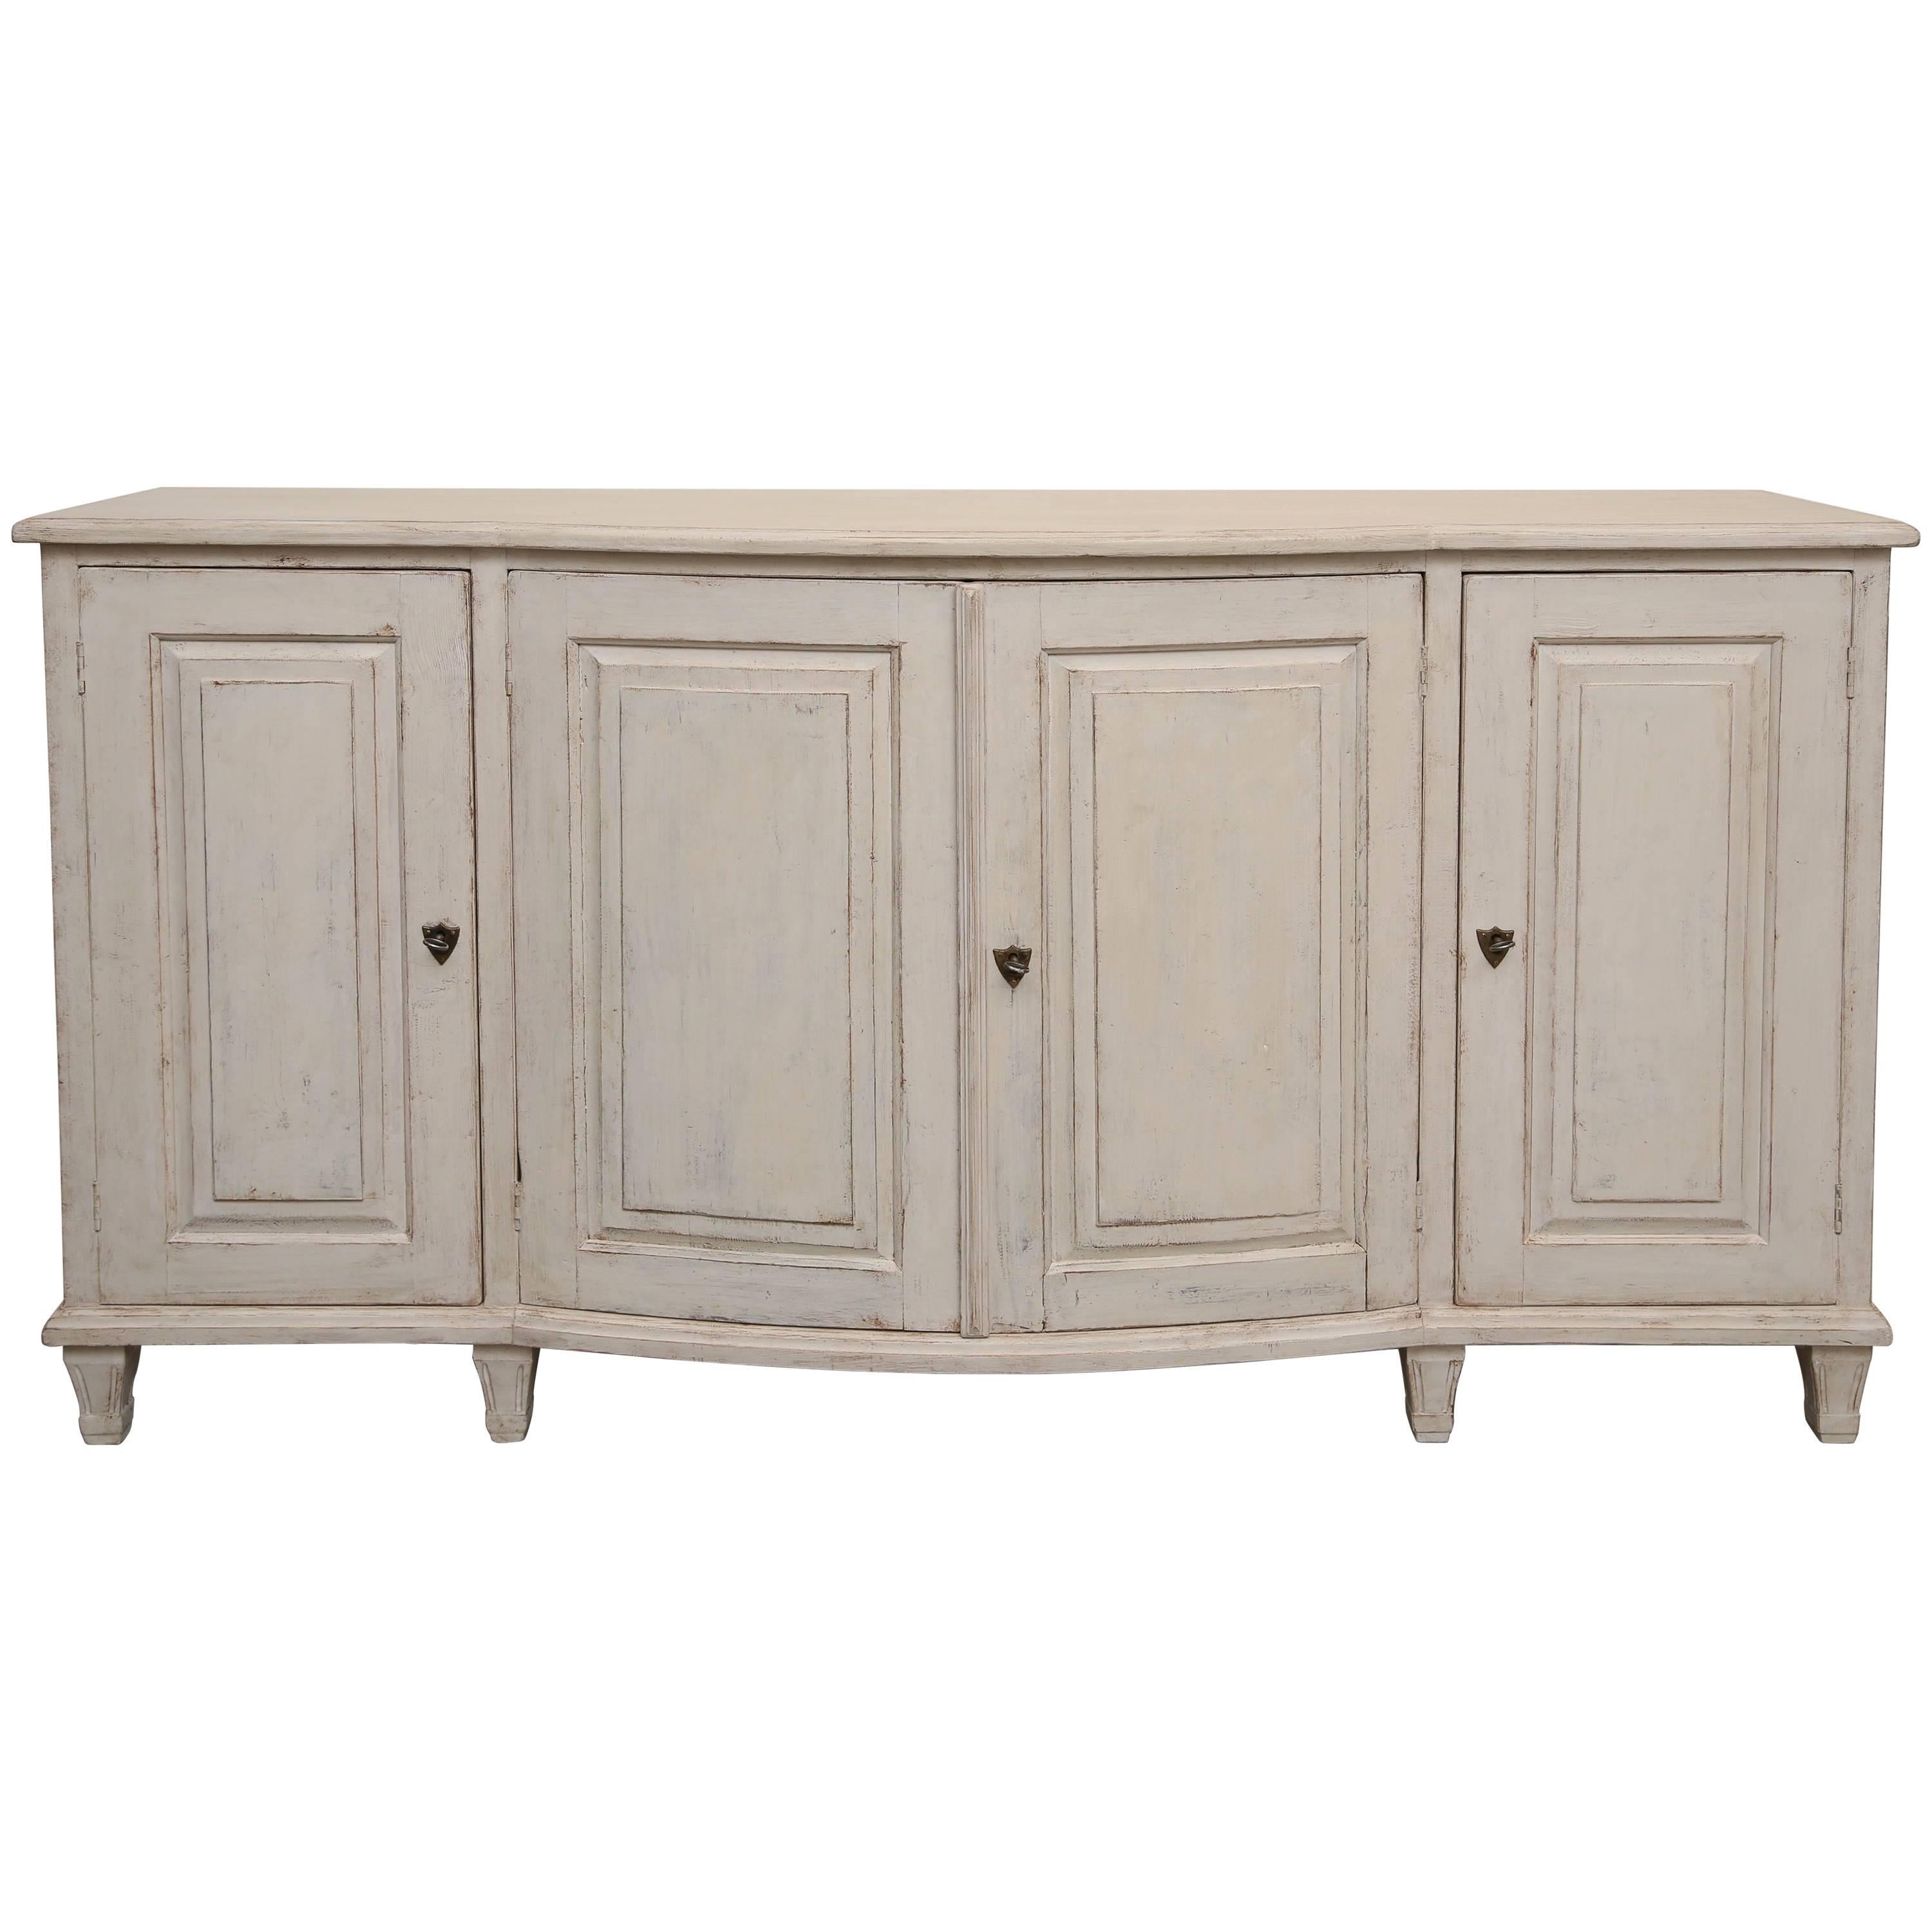 Large Antique Swedish Gustavian Style Painted Bowed Sideboard, 19th Century